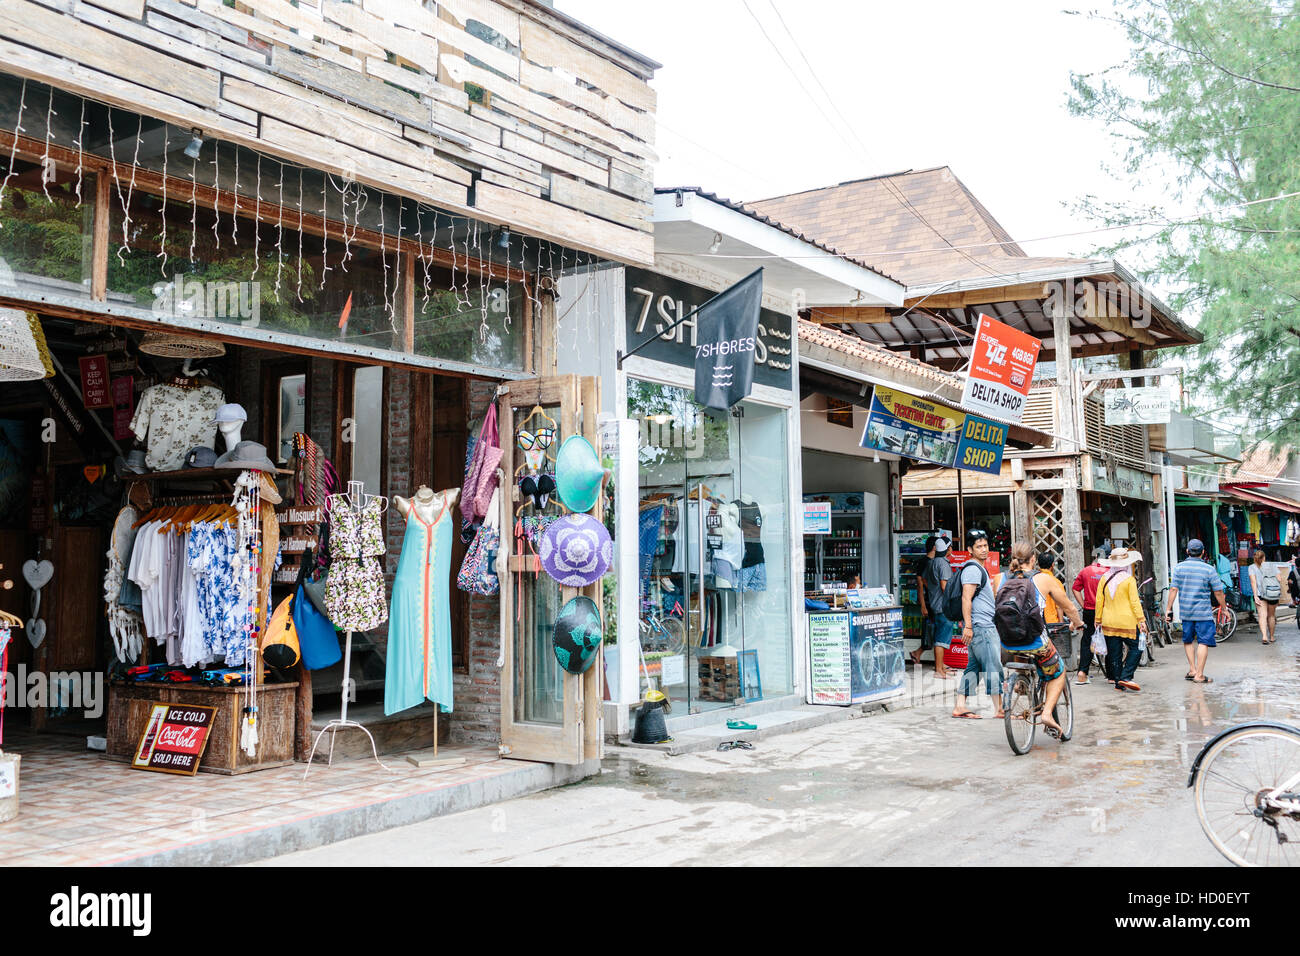 Clothing boutiques and shops on the main street on Gili Trawangan, Indonesia Stock Photo